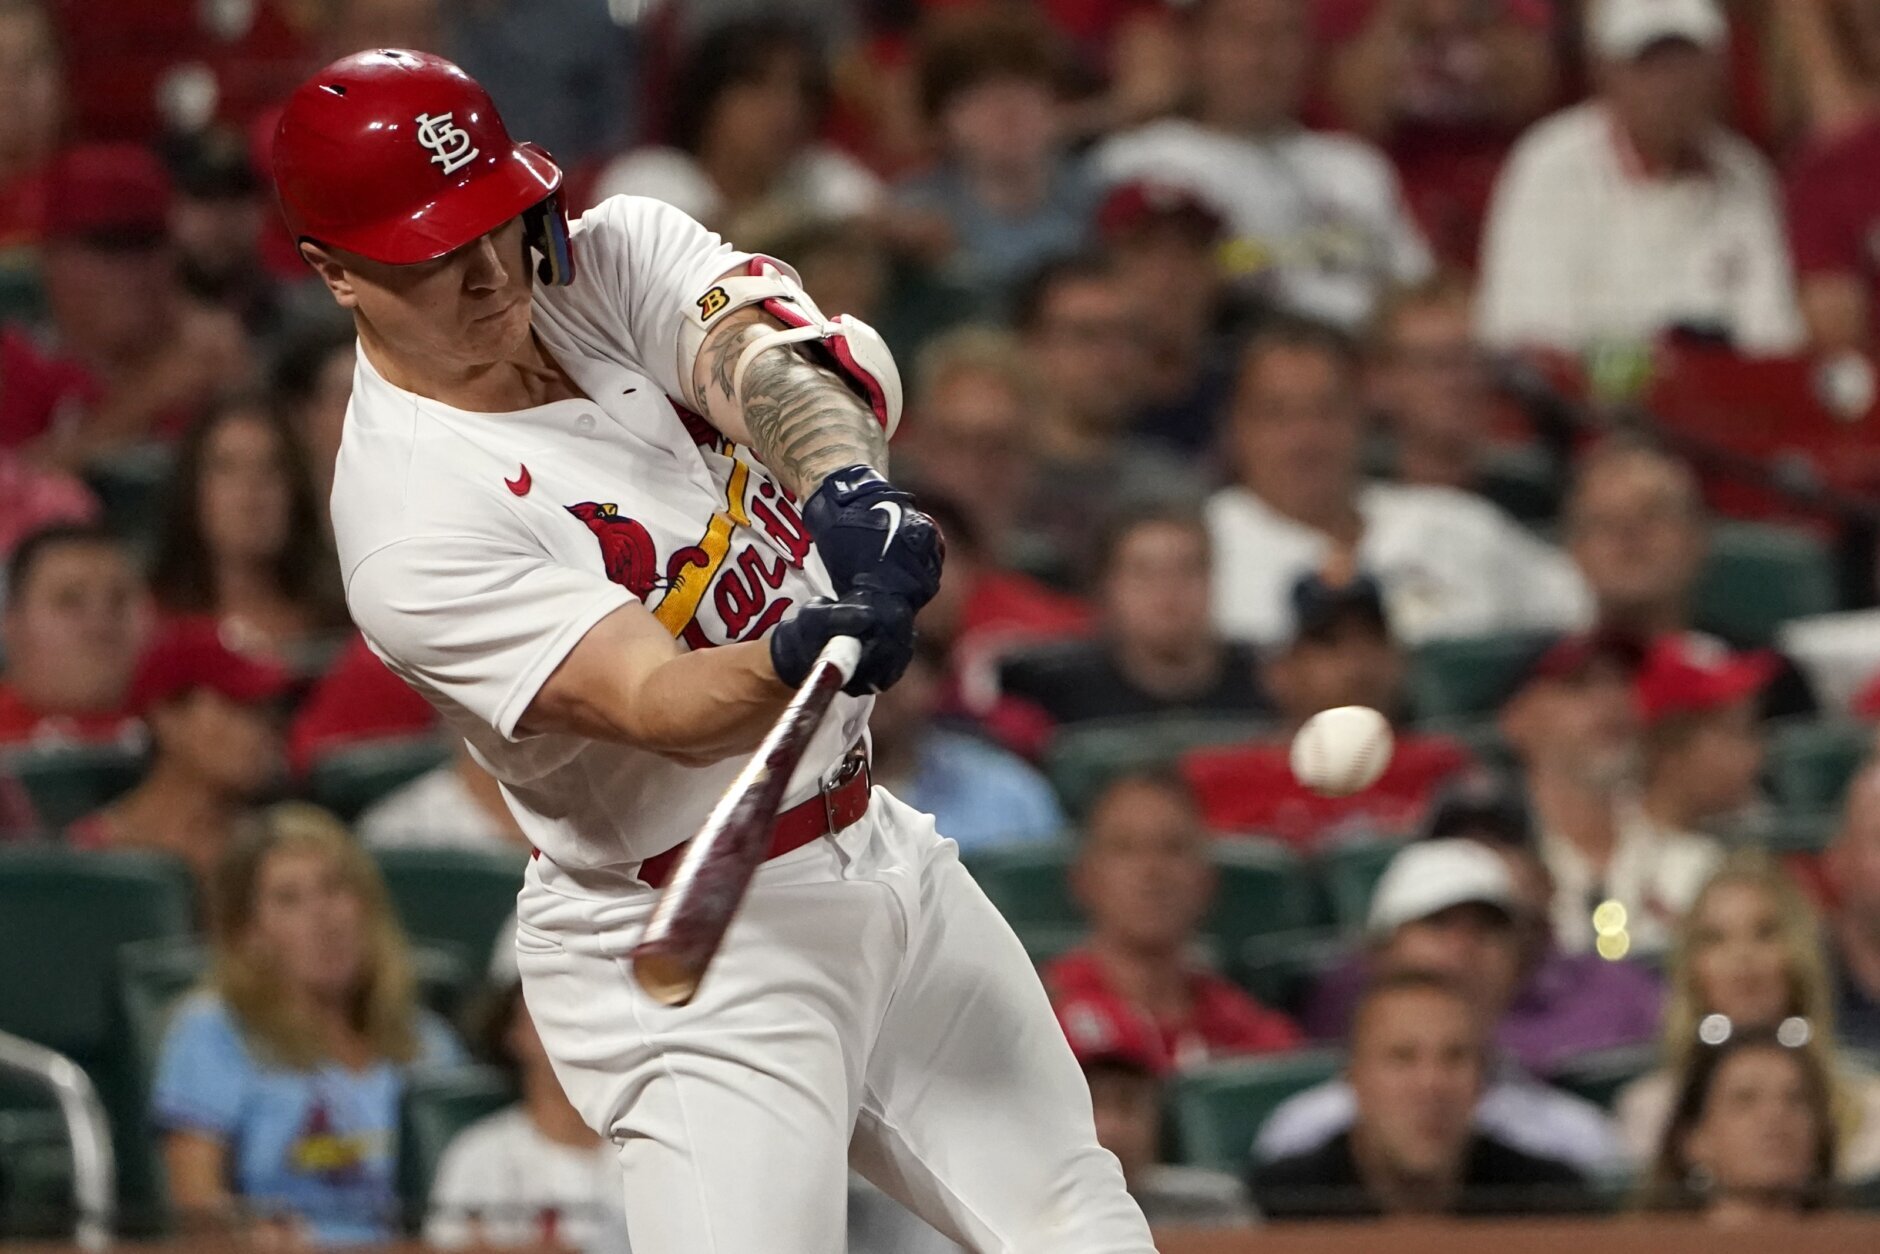 Gorman homers, drives in 4, as Cardinals rout Brewers 8-3